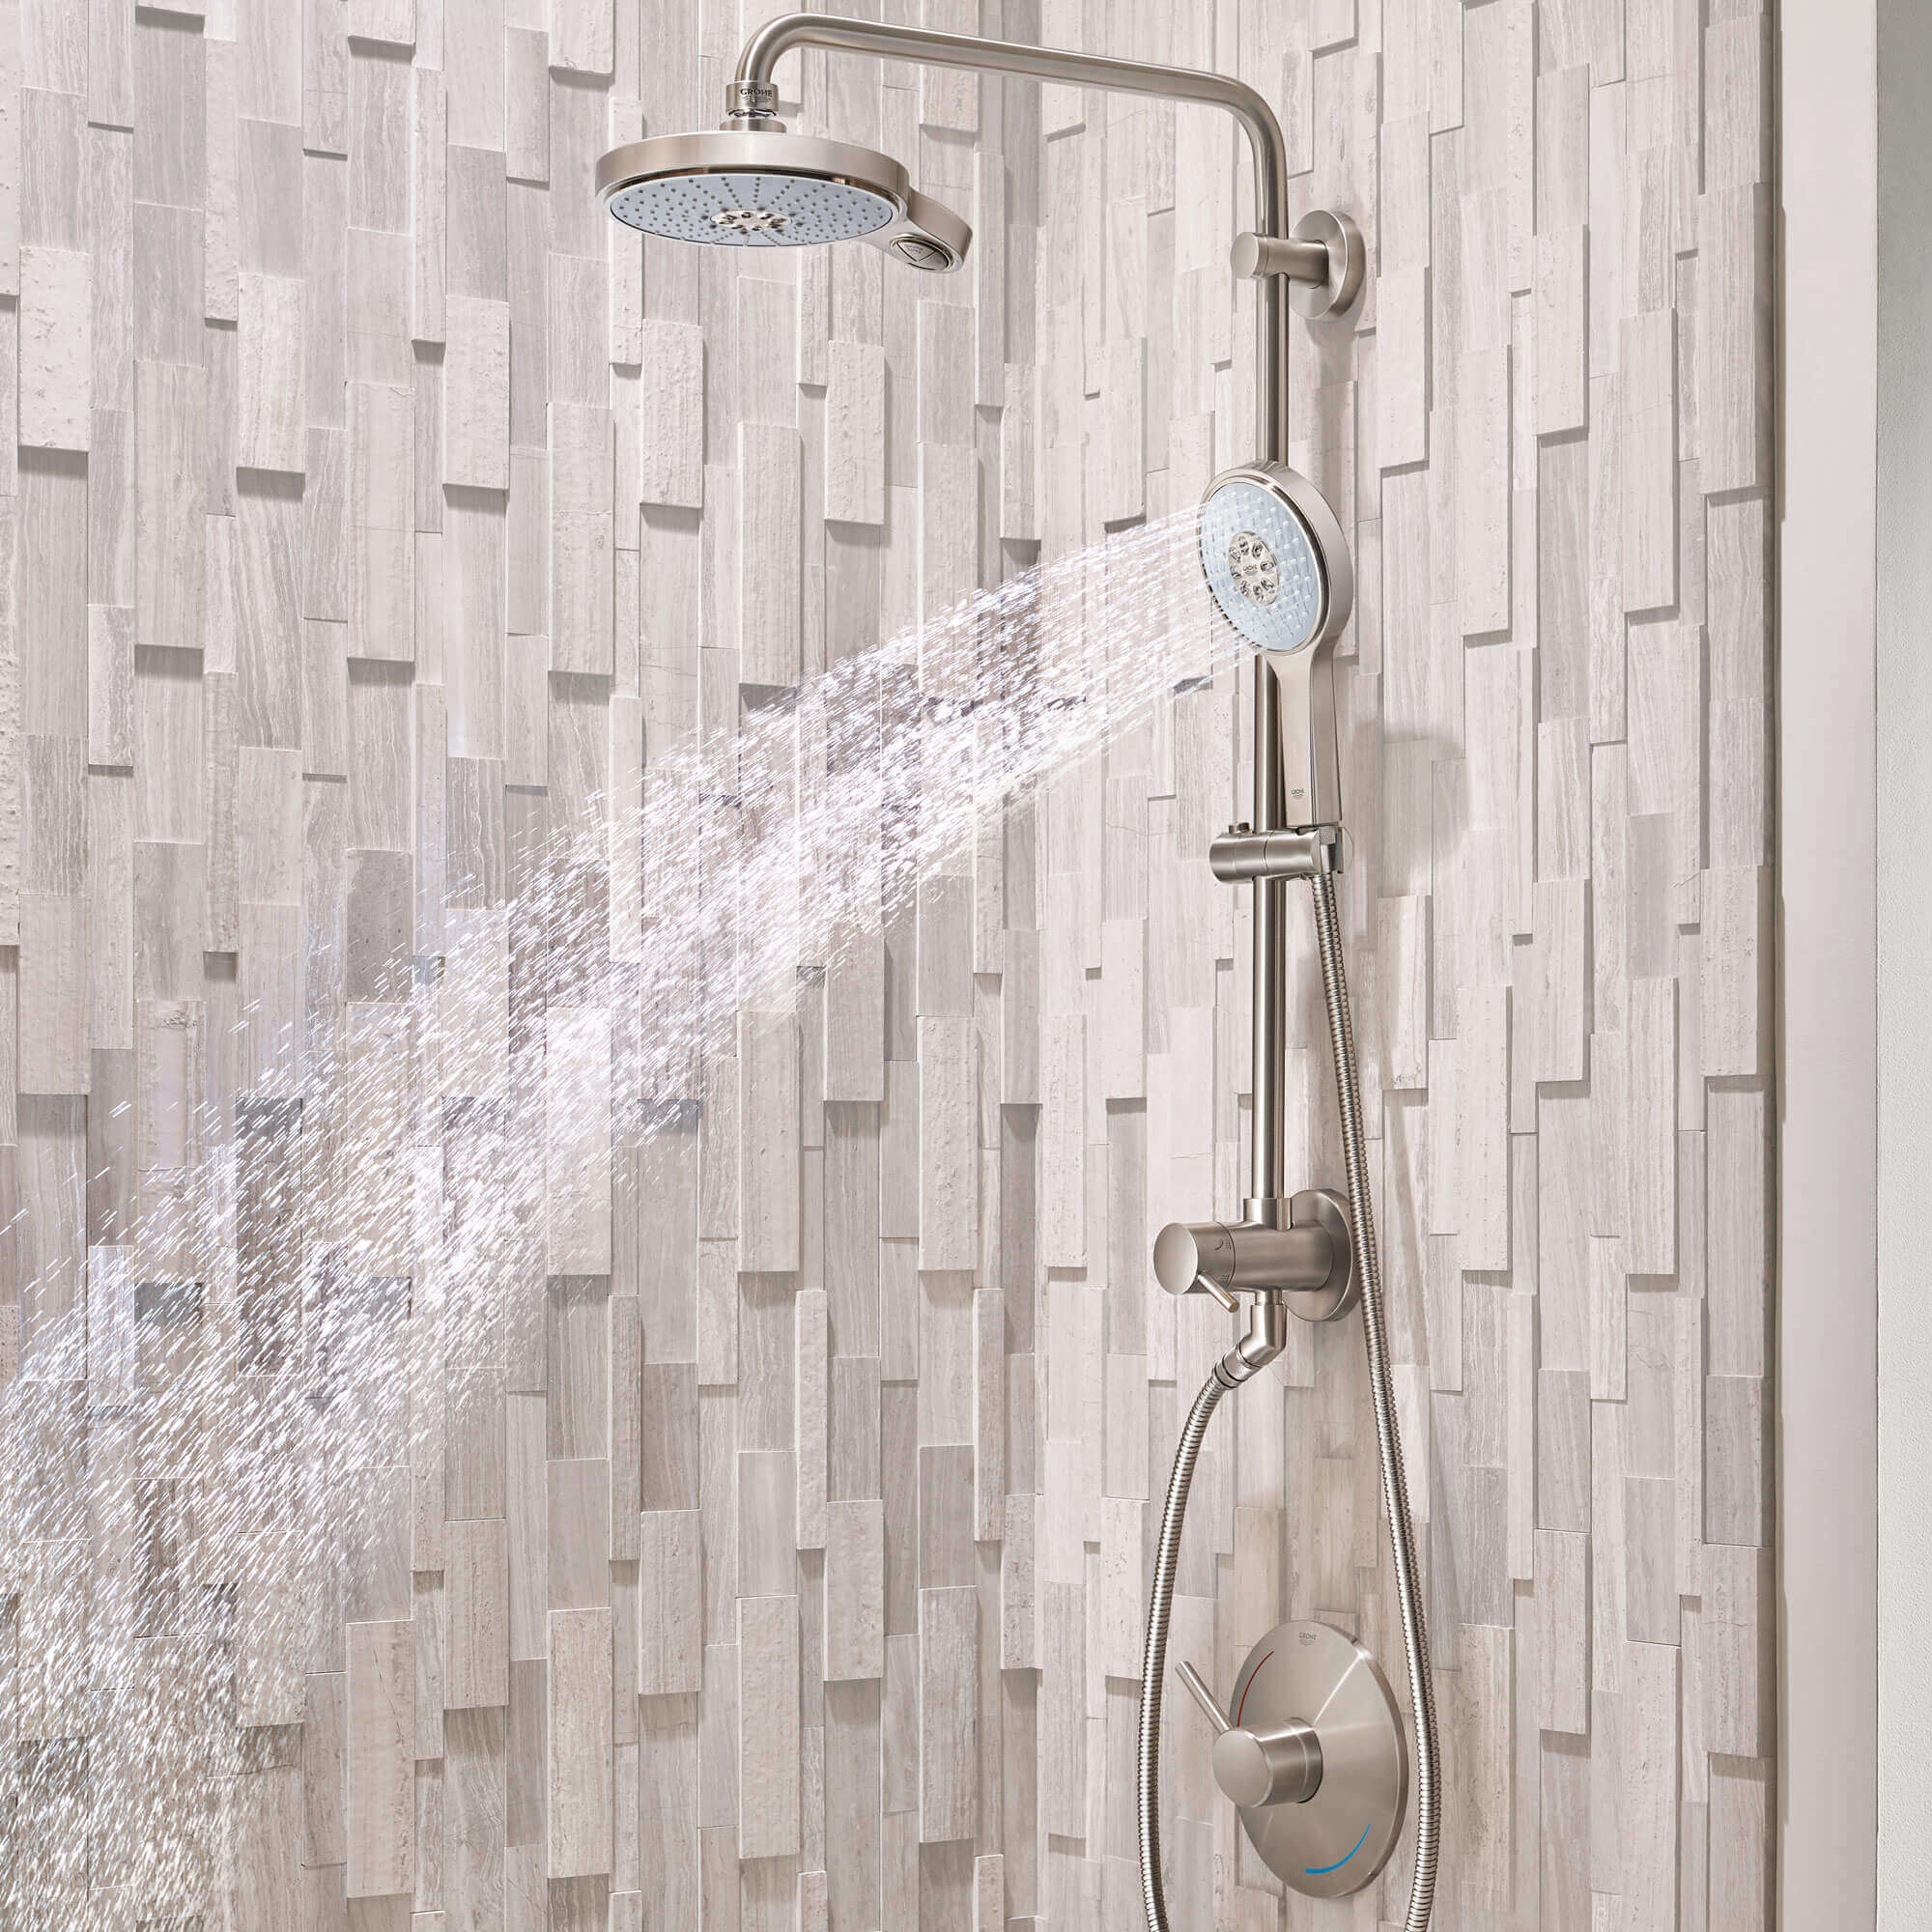 Retro-fit bathroom shower spouting water 